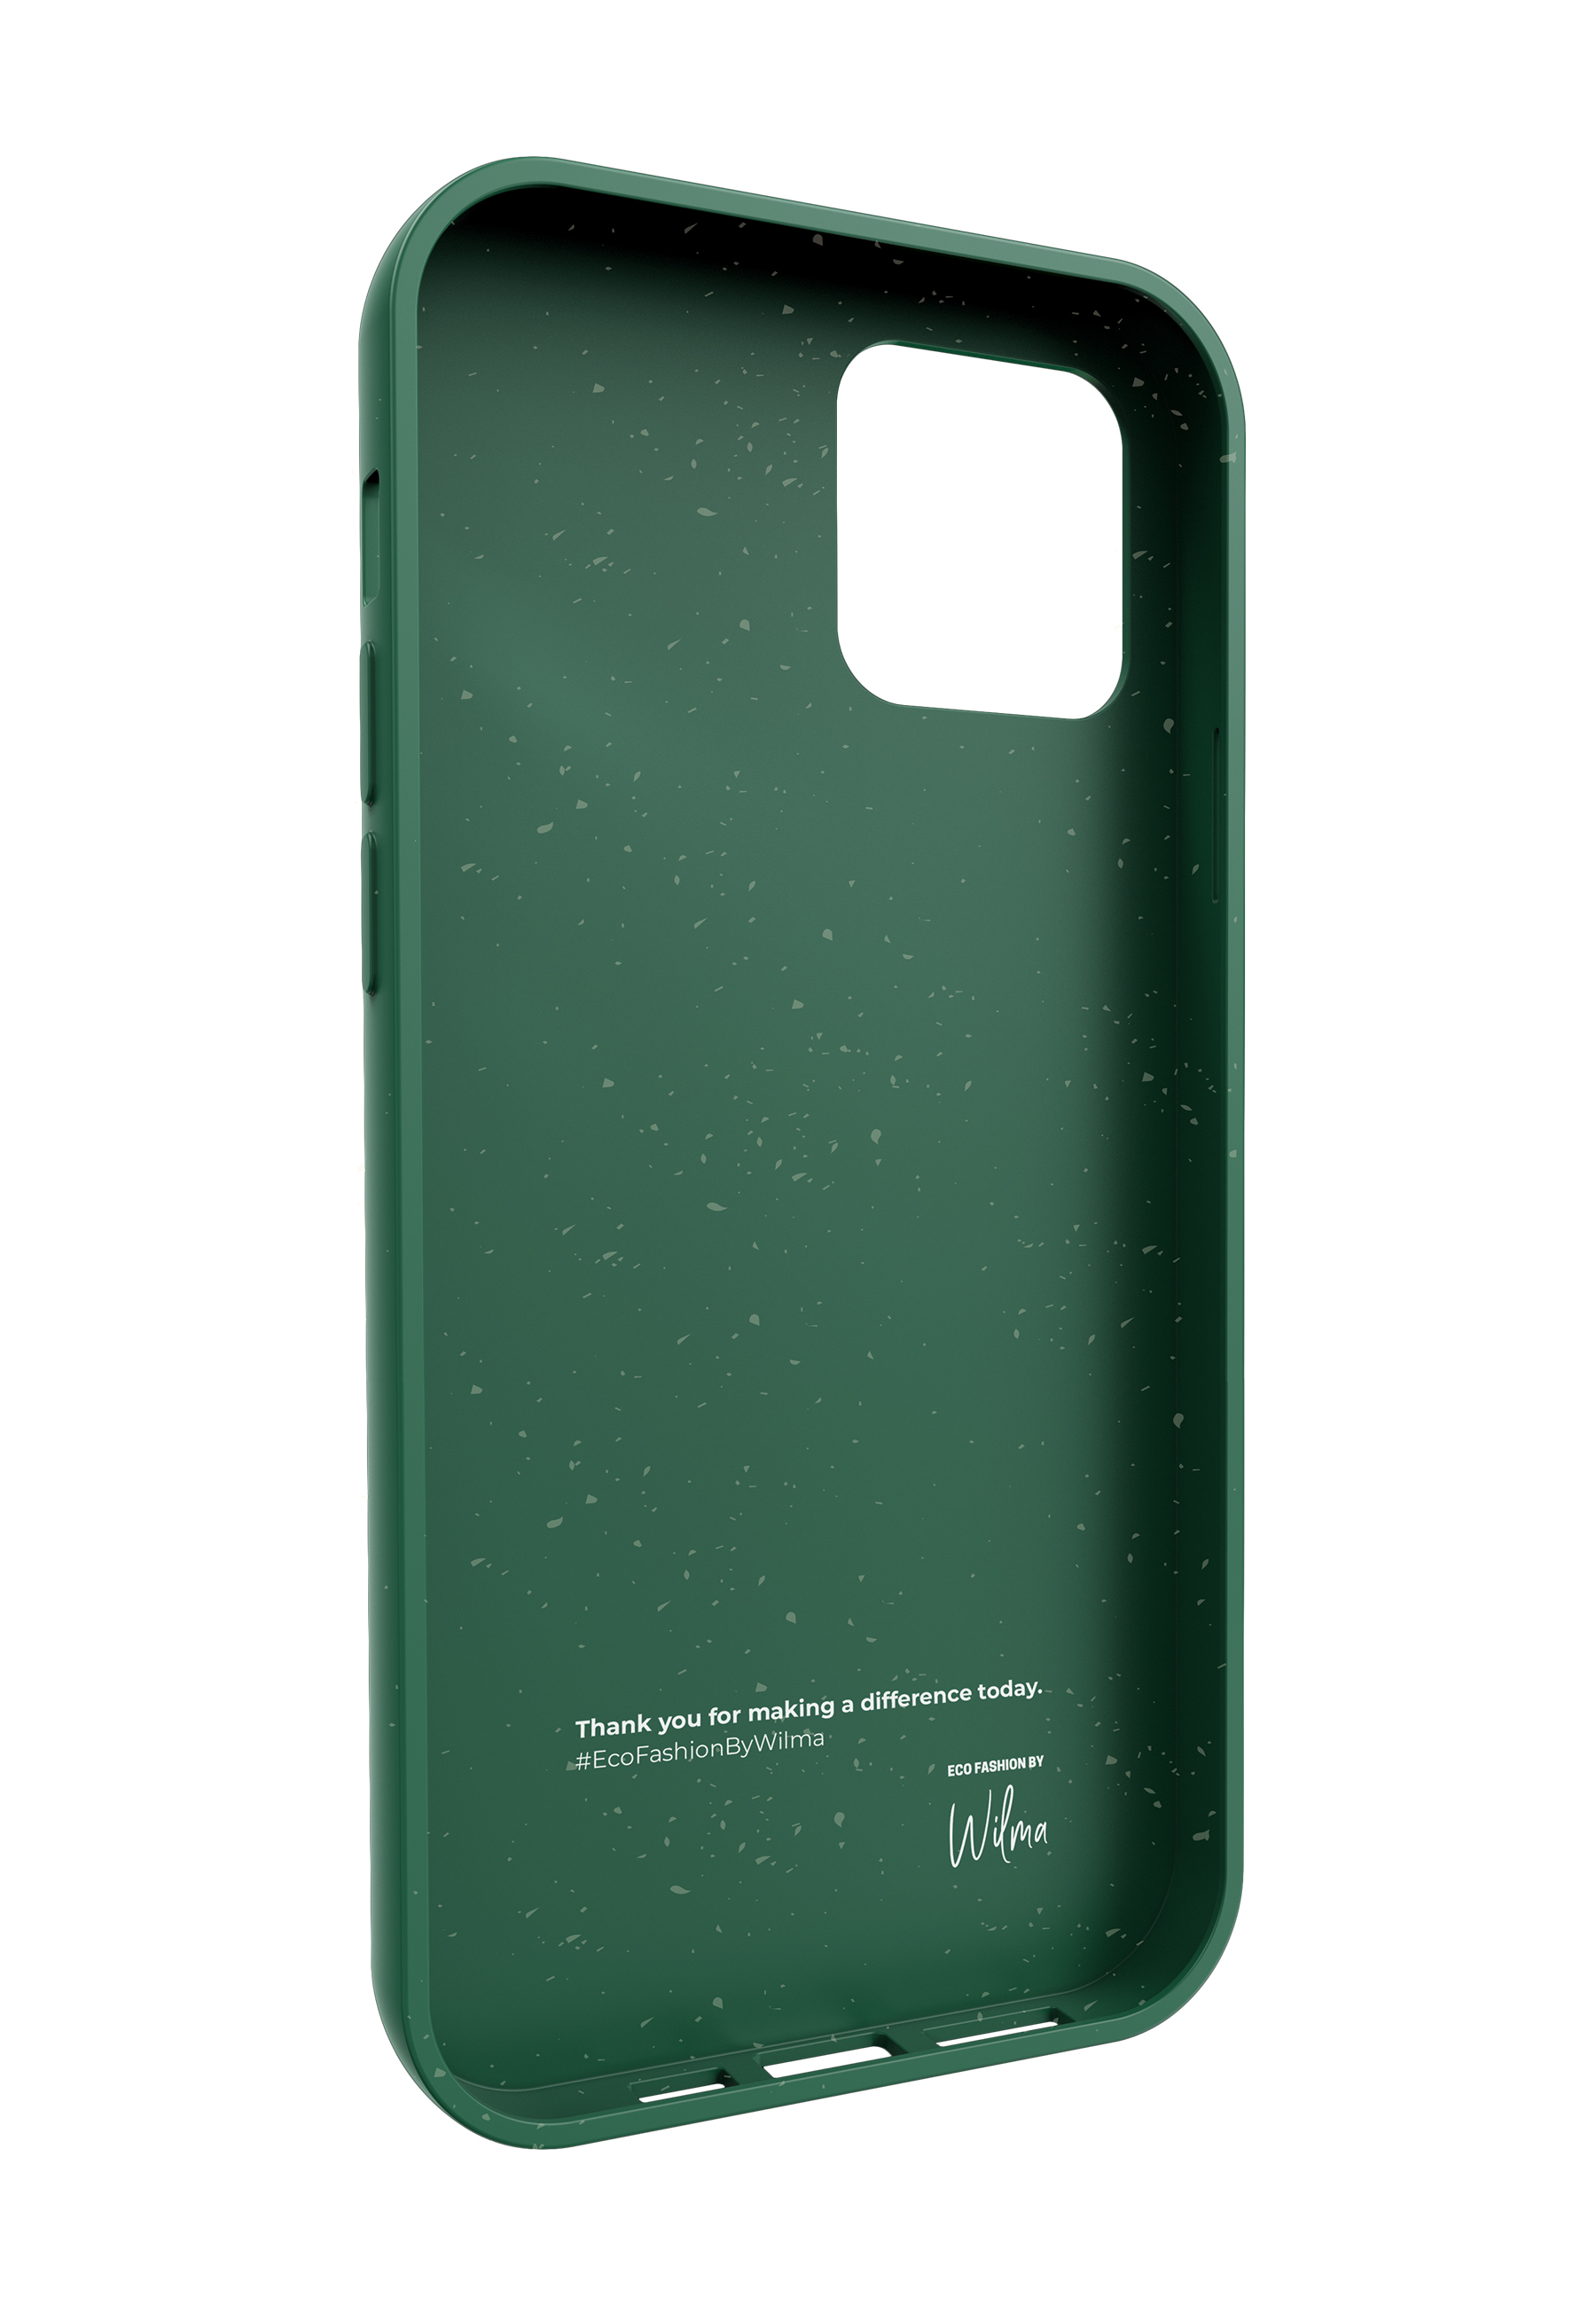 ECO FASHION BY Max, P12PM, green 12 Apple, Pro Backcover, WILMA iPhone